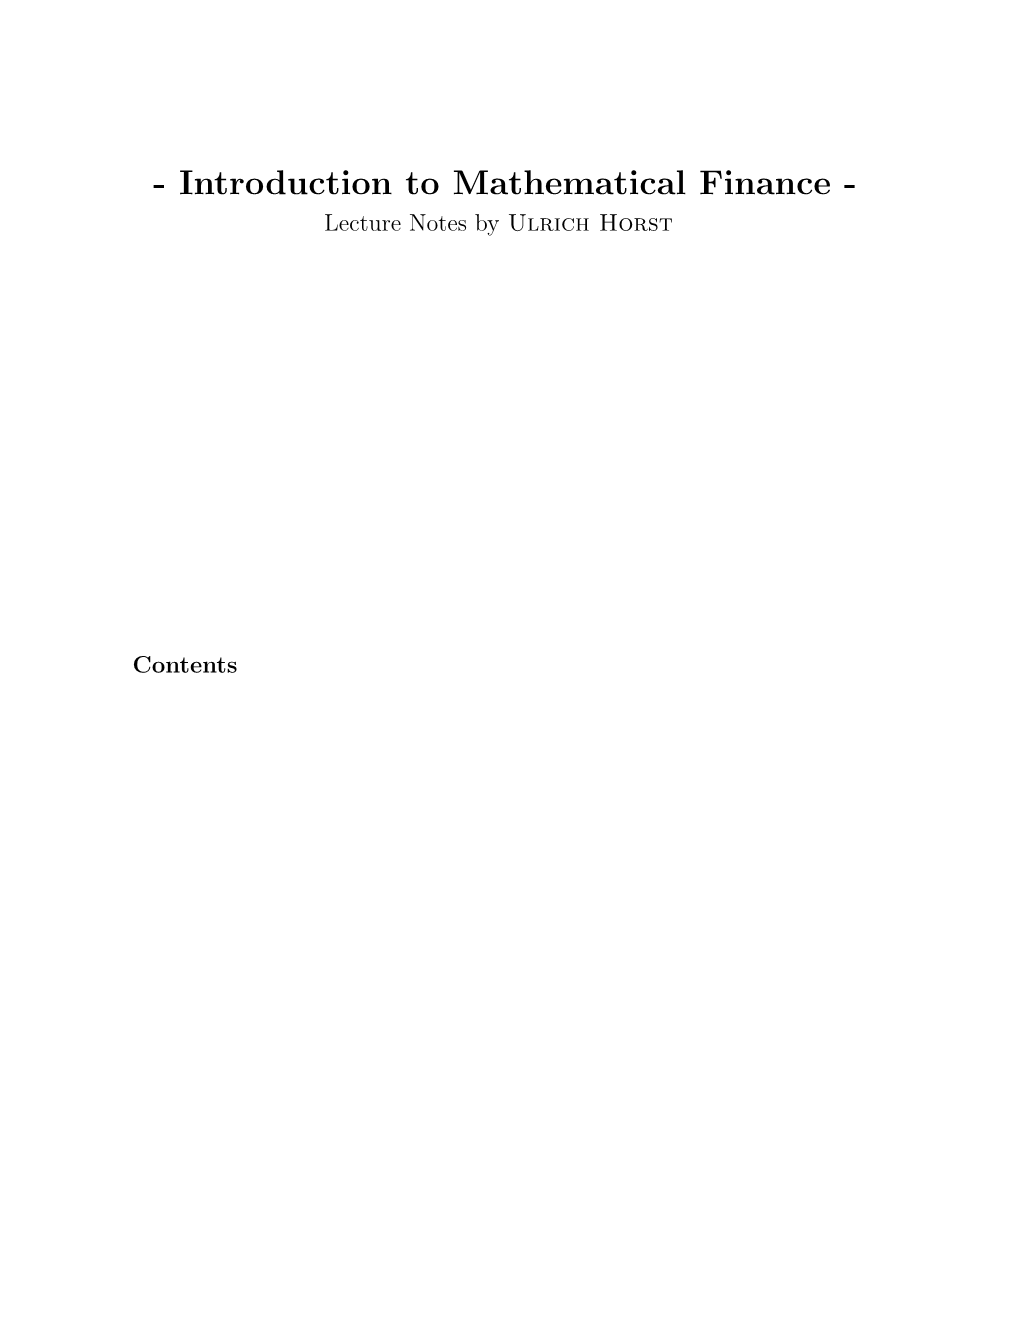 Introduction to Mathematical Finance - Lecture Notes by Ulrich Horst